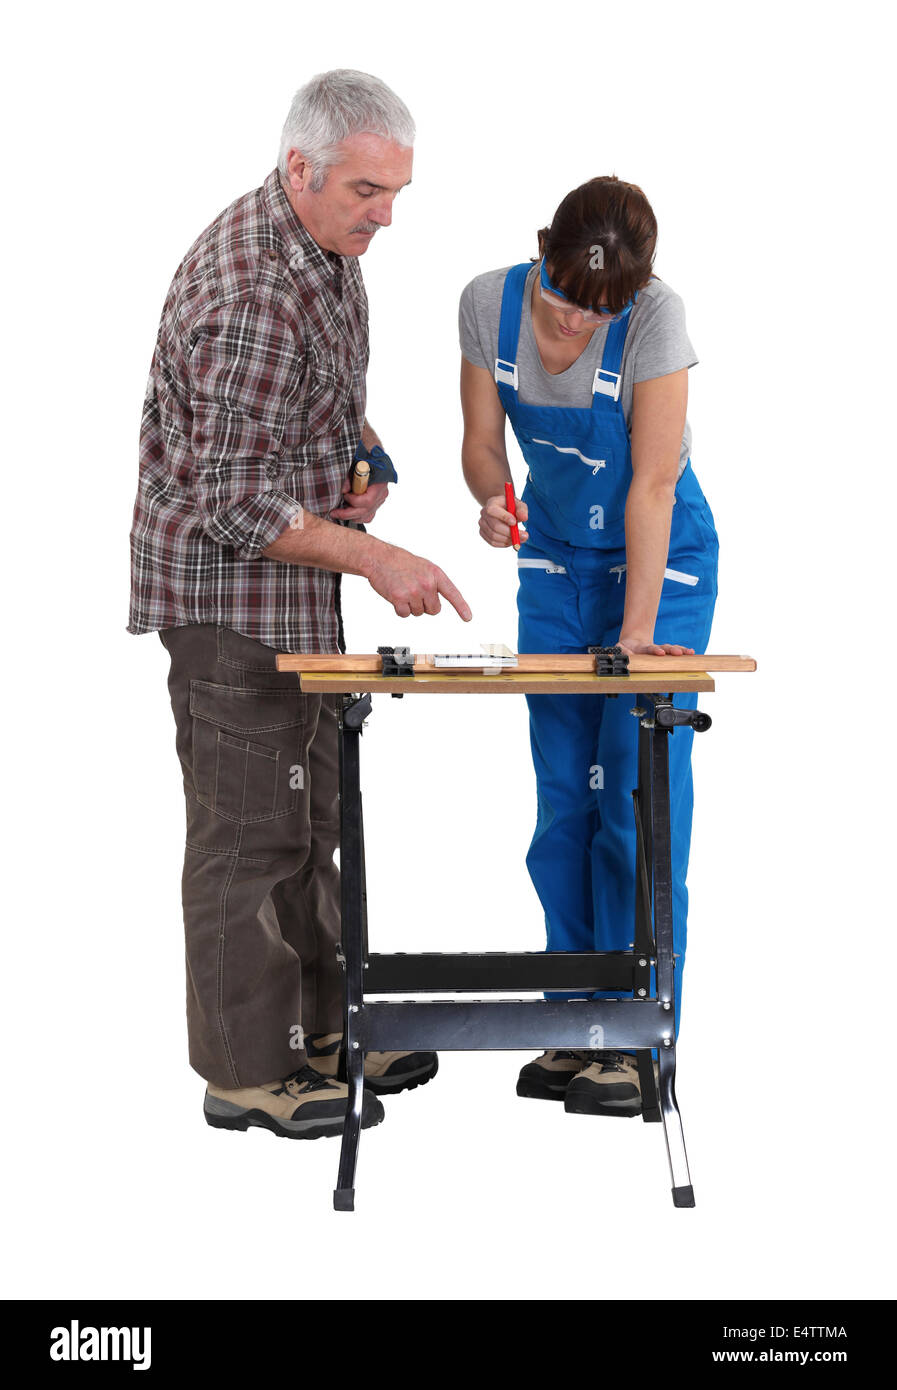 Carpenter with young intern Stock Photo